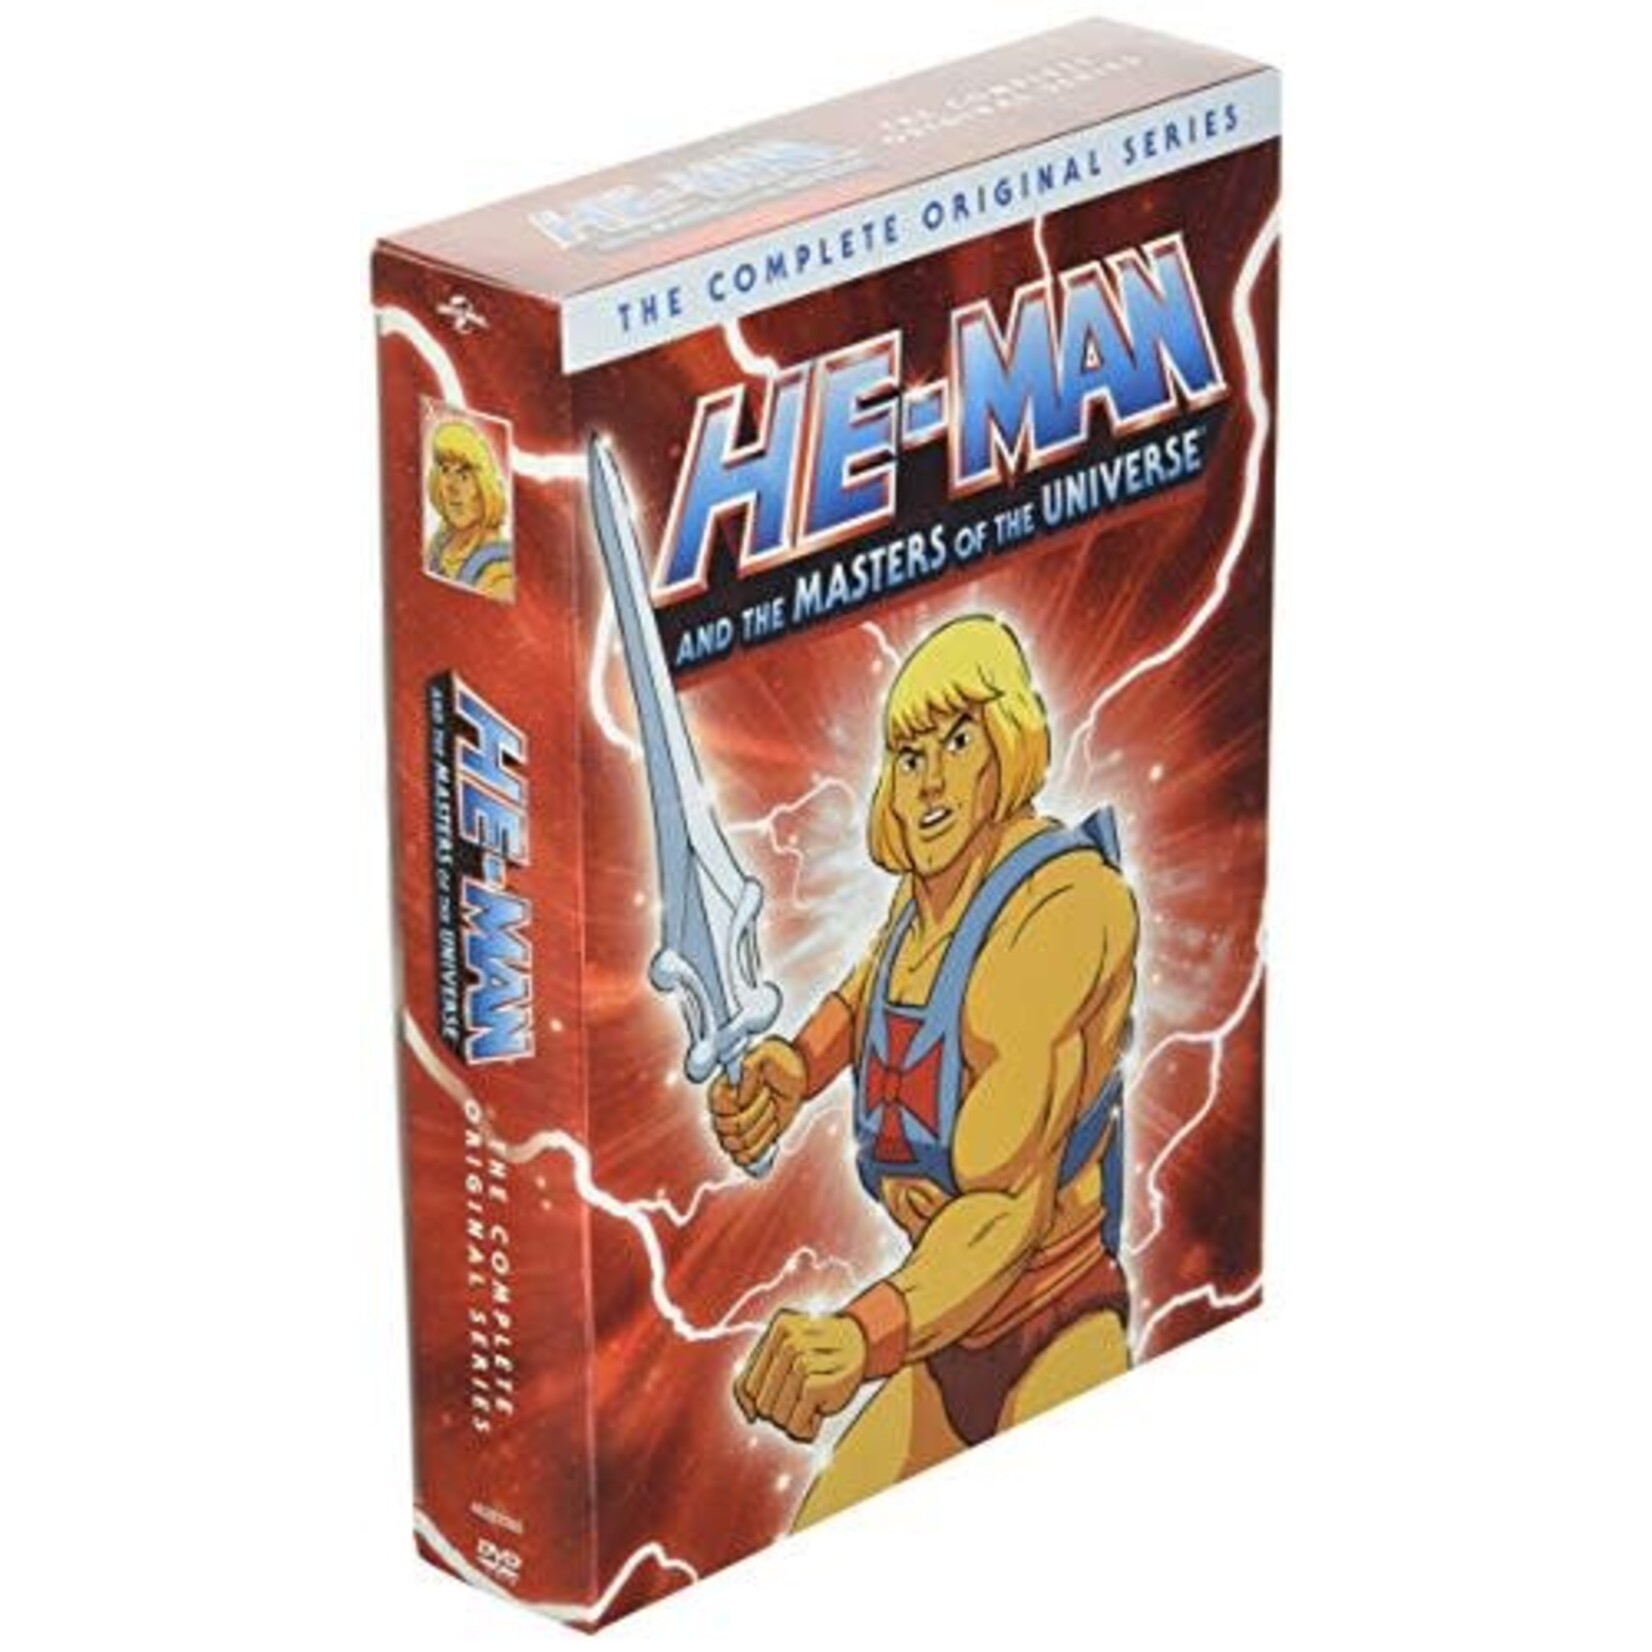 He-Man And The Masters Of The Universe - The Complete Original Series [USED 16DVD]